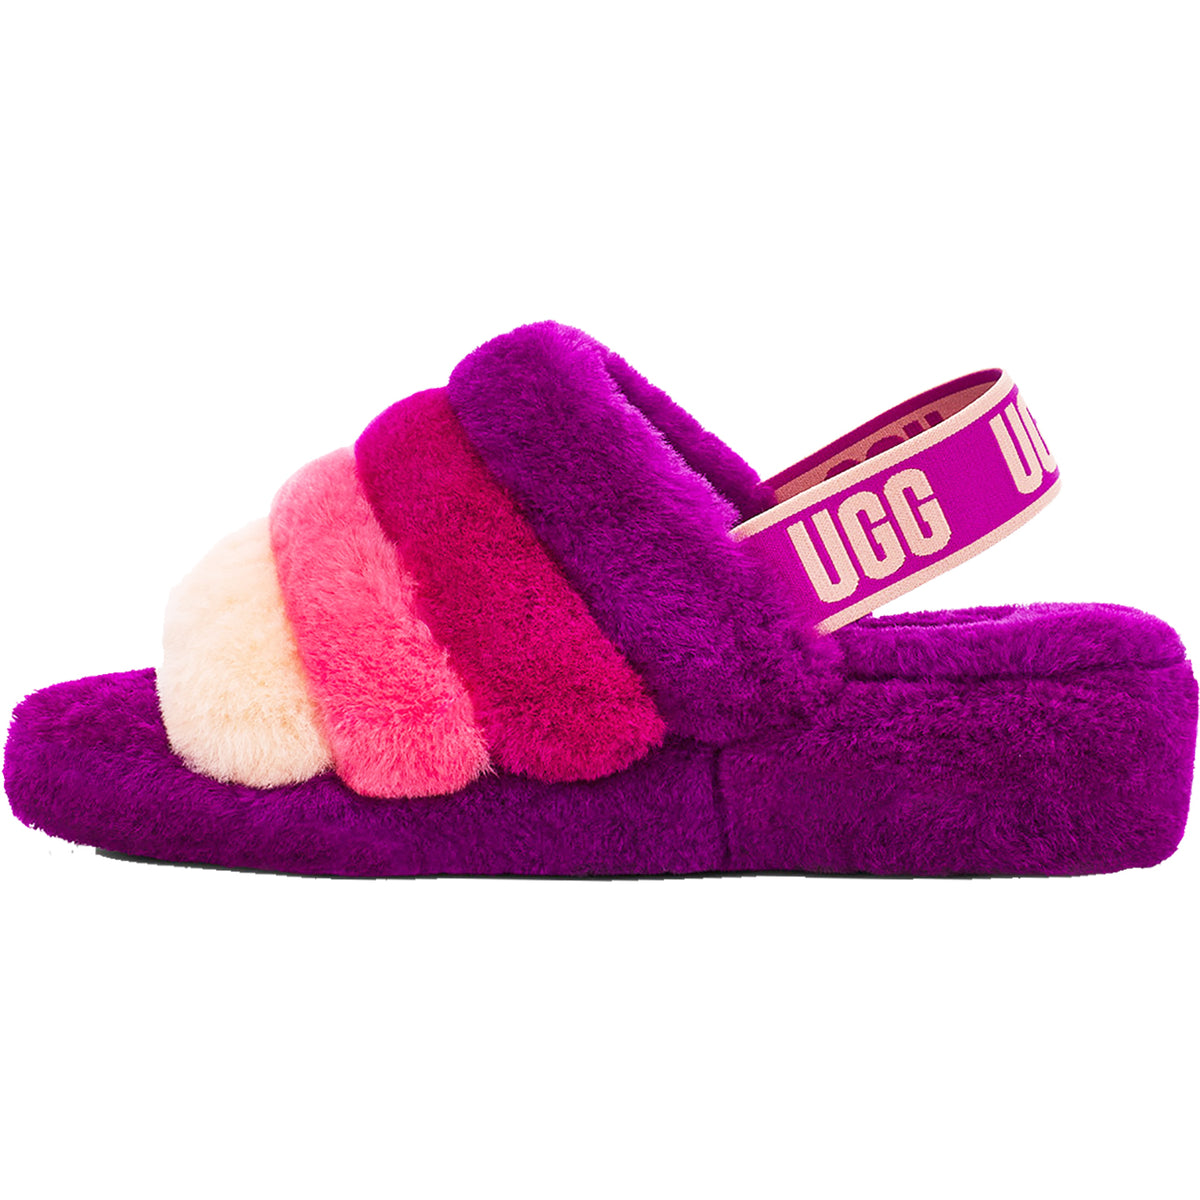 13 Best Slippers For Women Of 2023 Reviewed | lupon.gov.ph